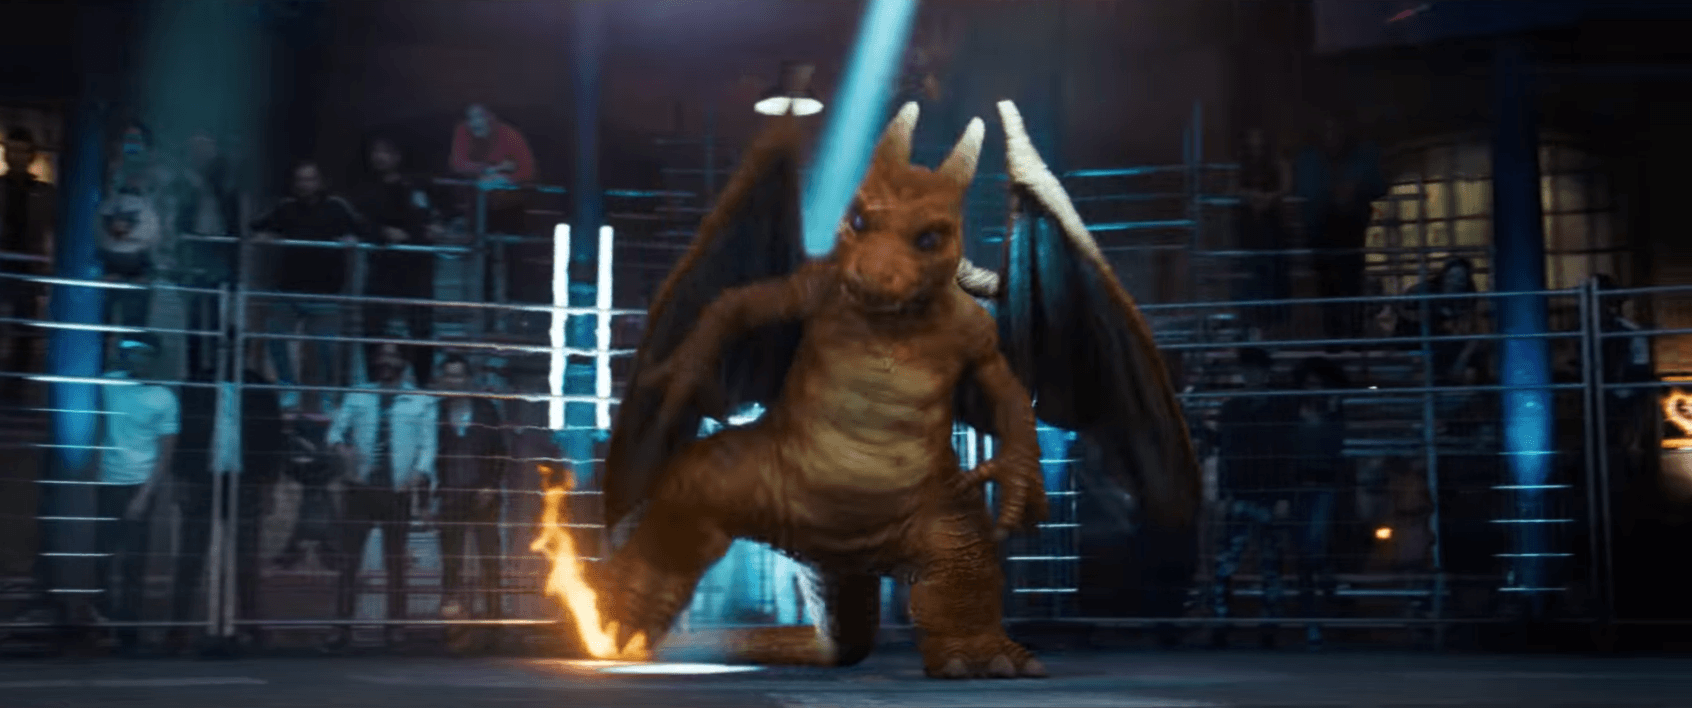 Every Pokémon We Spotted in the DETECTIVE PIKACHU